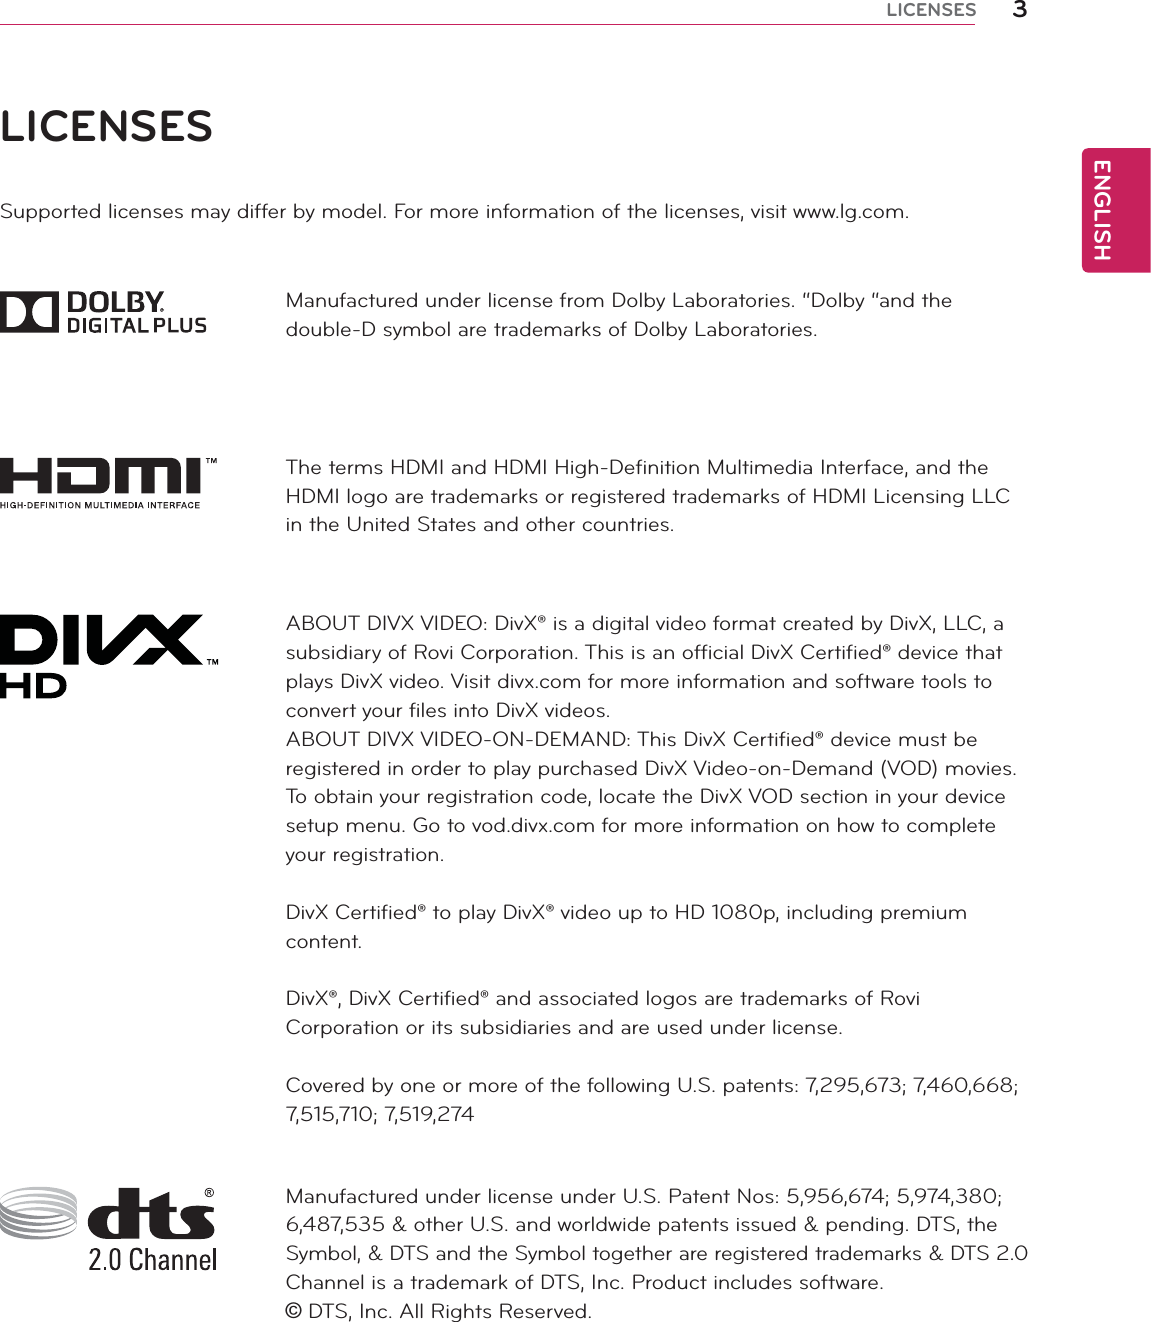 ENGLISH3LICENSESLICENSESSupported licenses may differ by model. For more information of the licenses, visit www.lg.com.Manufactured under license from Dolby Laboratories. “Dolby “and the double-D symbol are trademarks of Dolby Laboratories.The terms HDMI and HDMI High-Definition Multimedia Interface, and the HDMI logo are trademarks or registered trademarks of HDMI Licensing LLC in the United States and other countries.ABOUT DIVX VIDEO: DivX® is a digital video format created by DivX, LLC, a subsidiary of Rovi Corporation. This is an official DivX Certified® device that plays DivX video. Visit divx.com for more information and software tools to convert your files into DivX videos.ABOUT DIVX VIDEO-ON-DEMAND: This DivX Certified® device must be registered in order to play purchased DivX Video-on-Demand (VOD) movies. To obtain your registration code, locate the DivX VOD section in your device setup menu. Go to vod.divx.com for more information on how to complete your registration.DivX Certified® to play DivX® video up to HD 1080p, including premium content.DivX®, DivX Certified® and associated logos are trademarks of Rovi Corporation or its subsidiaries and are used under license.Covered by one or more of the following U.S. patents: 7,295,673; 7,460,668; 7,515,710; 7,519,274Manufactured under license under U.S. Patent Nos: 5,956,674; 5,974,380; 6,487,535 &amp; other U.S. and worldwide patents issued &amp; pending. DTS, the Symbol, &amp; DTS and the Symbol together are registered trademarks &amp; DTS 2.0 Channel is a trademark of DTS, Inc. Product includes software.   DTS, Inc. All Rights Reserved.